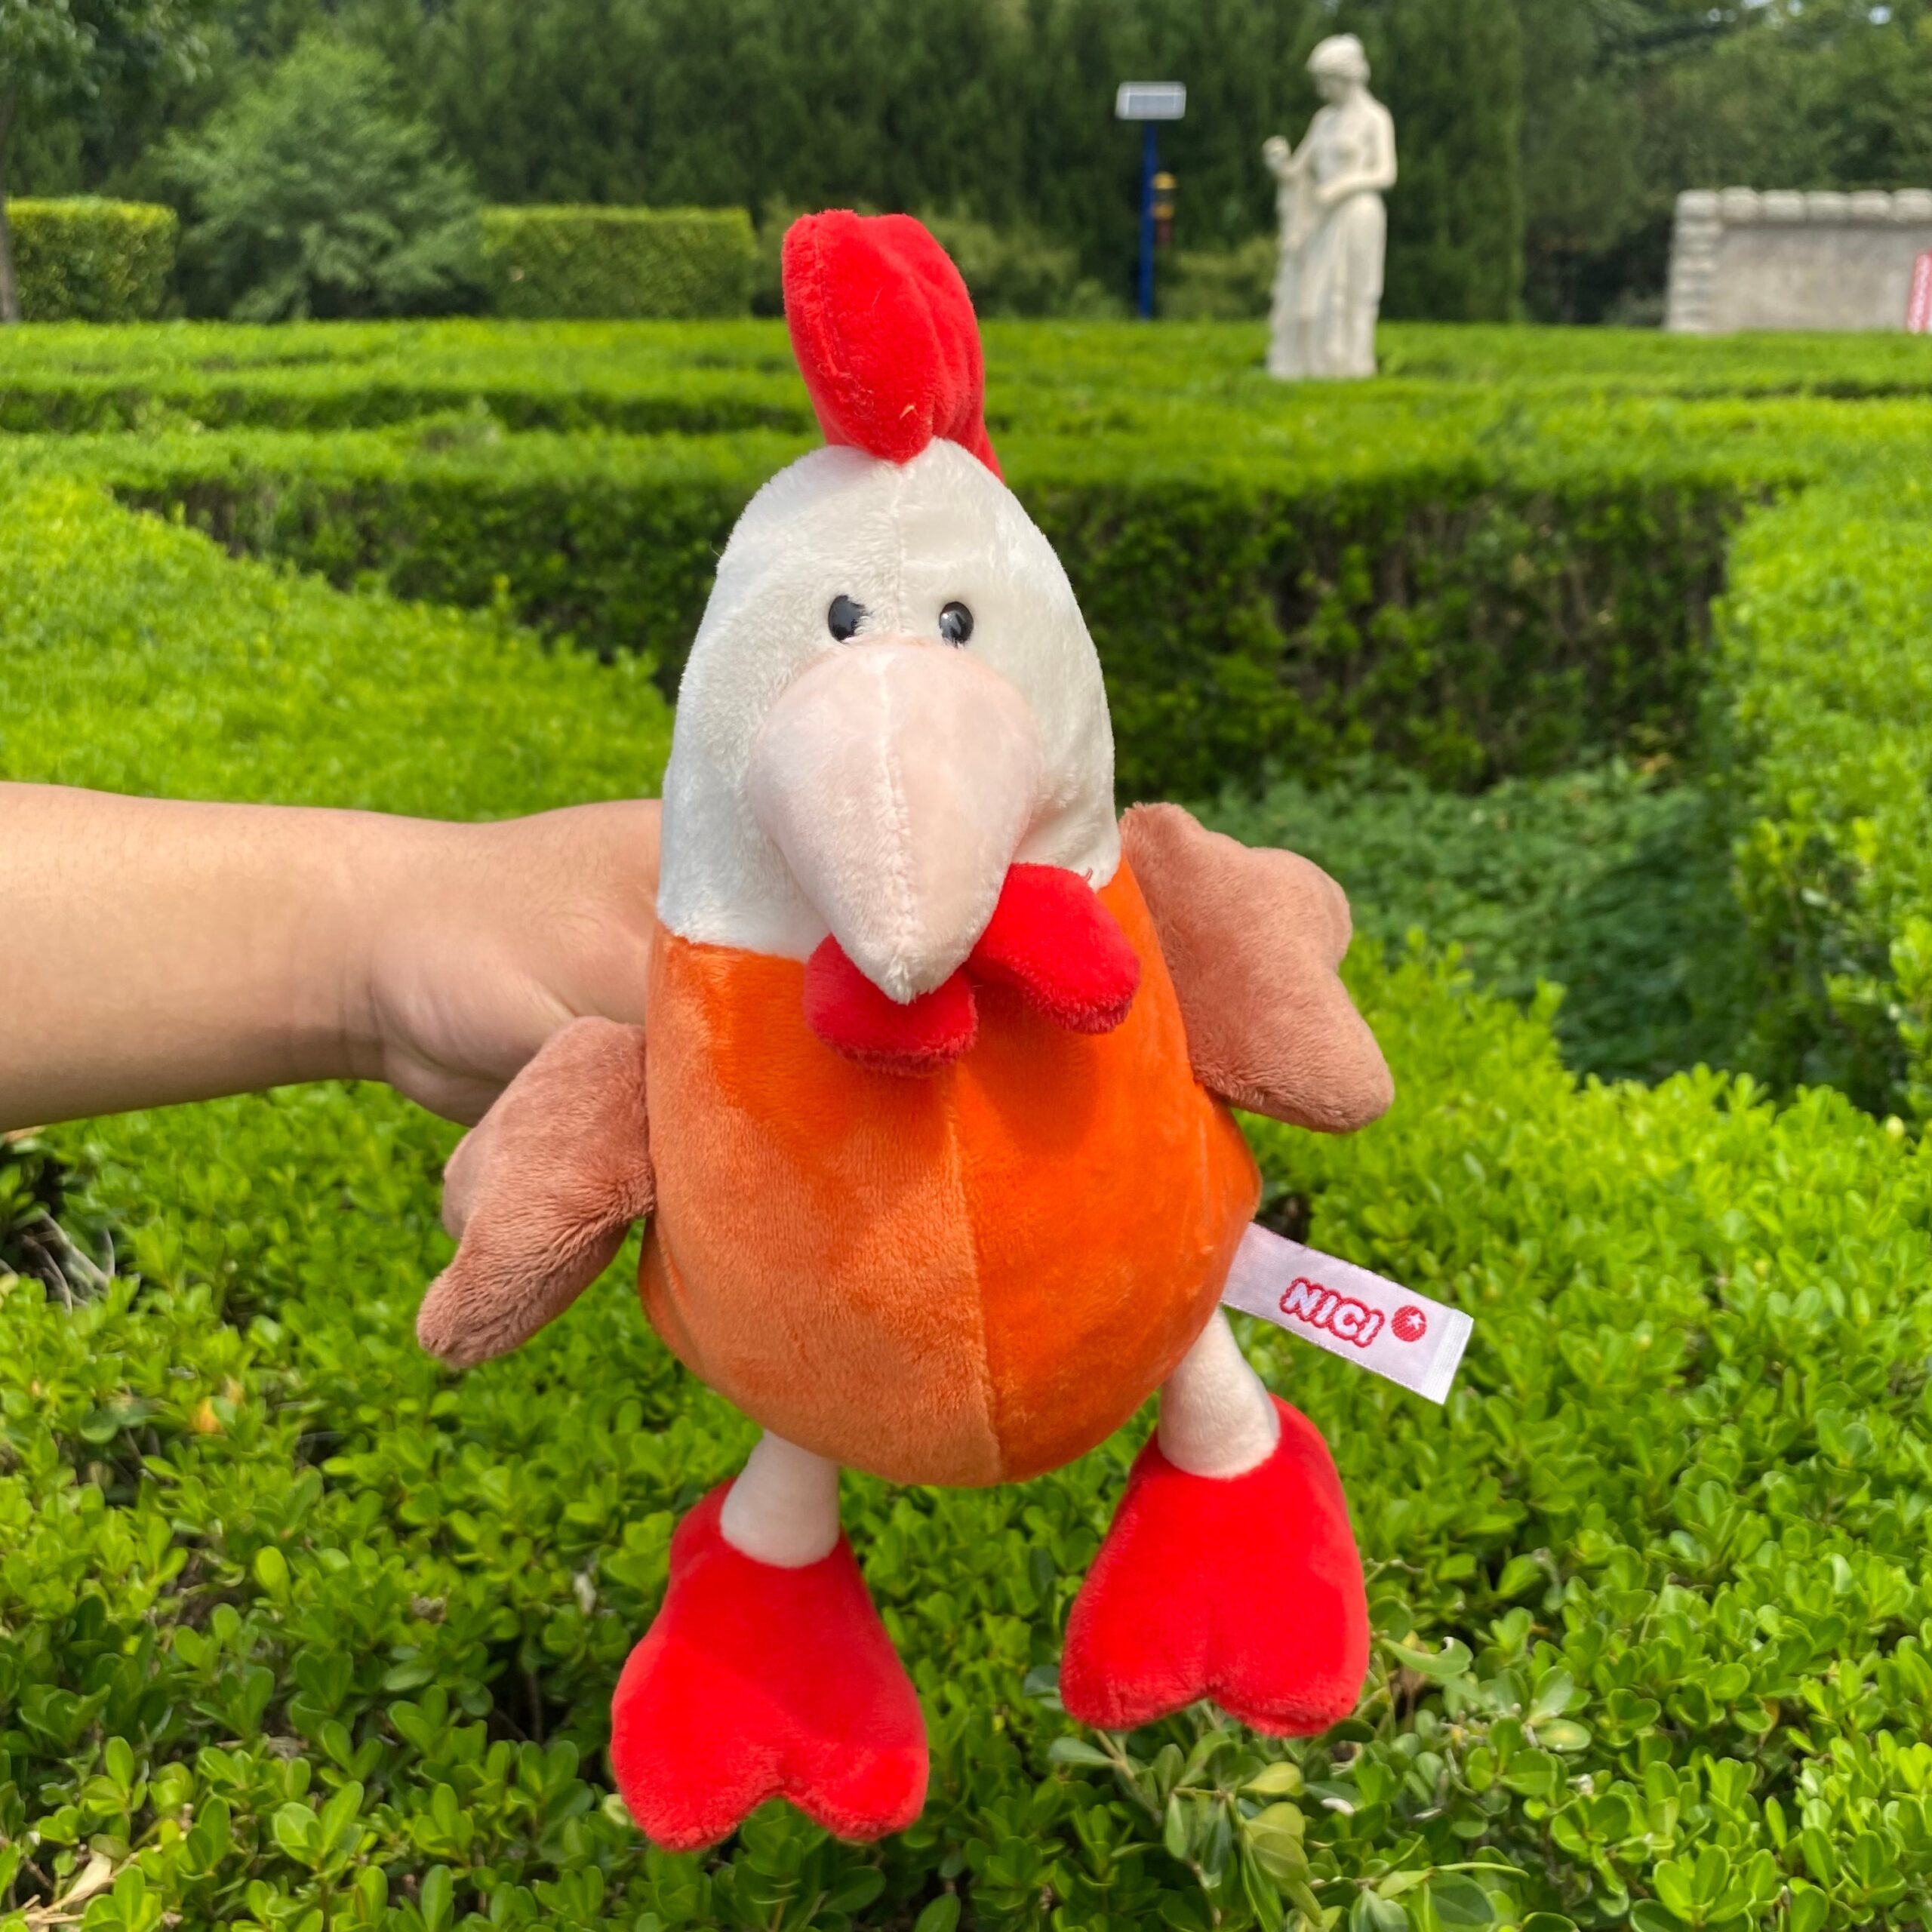 25cm Creative Red White Chick Chicken Stuffed Animal Plush Toy Birthday Gift Cute Cock Dolls Rooster Chicken Plush